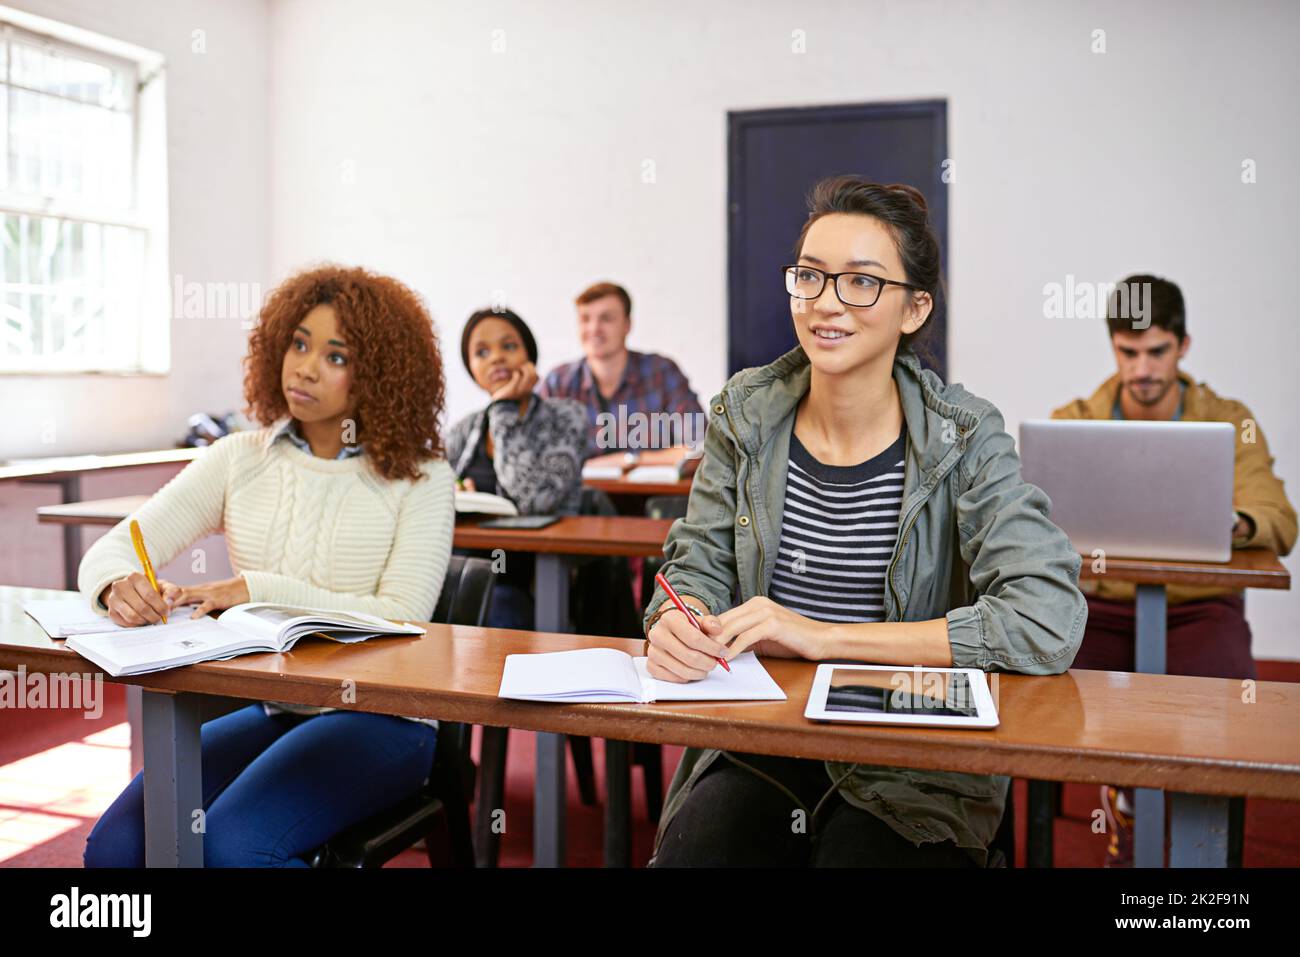 Focused on absorbing information. Shot of a university students paying attention in class. Stock Photo